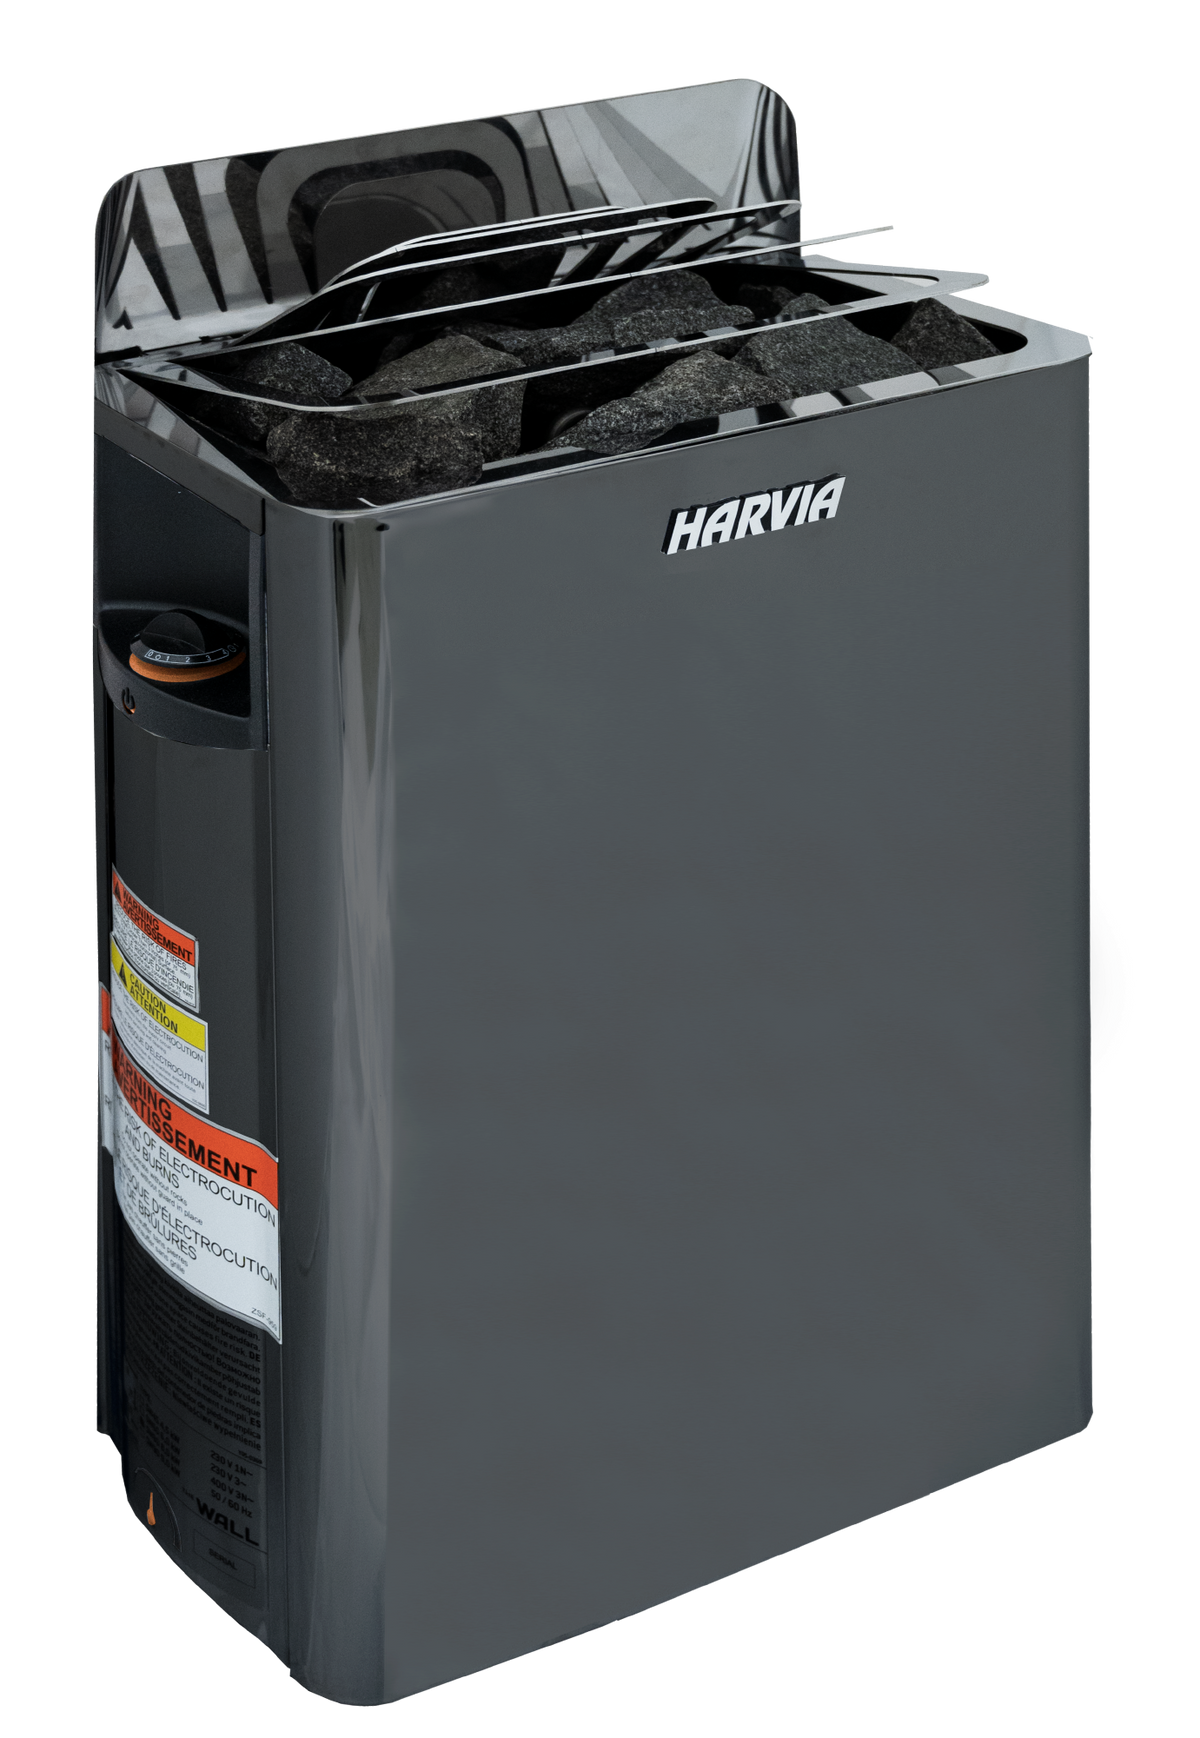 Harvia The Wall Electric Sauna Heater w/ Built-in Controls 6/8kW